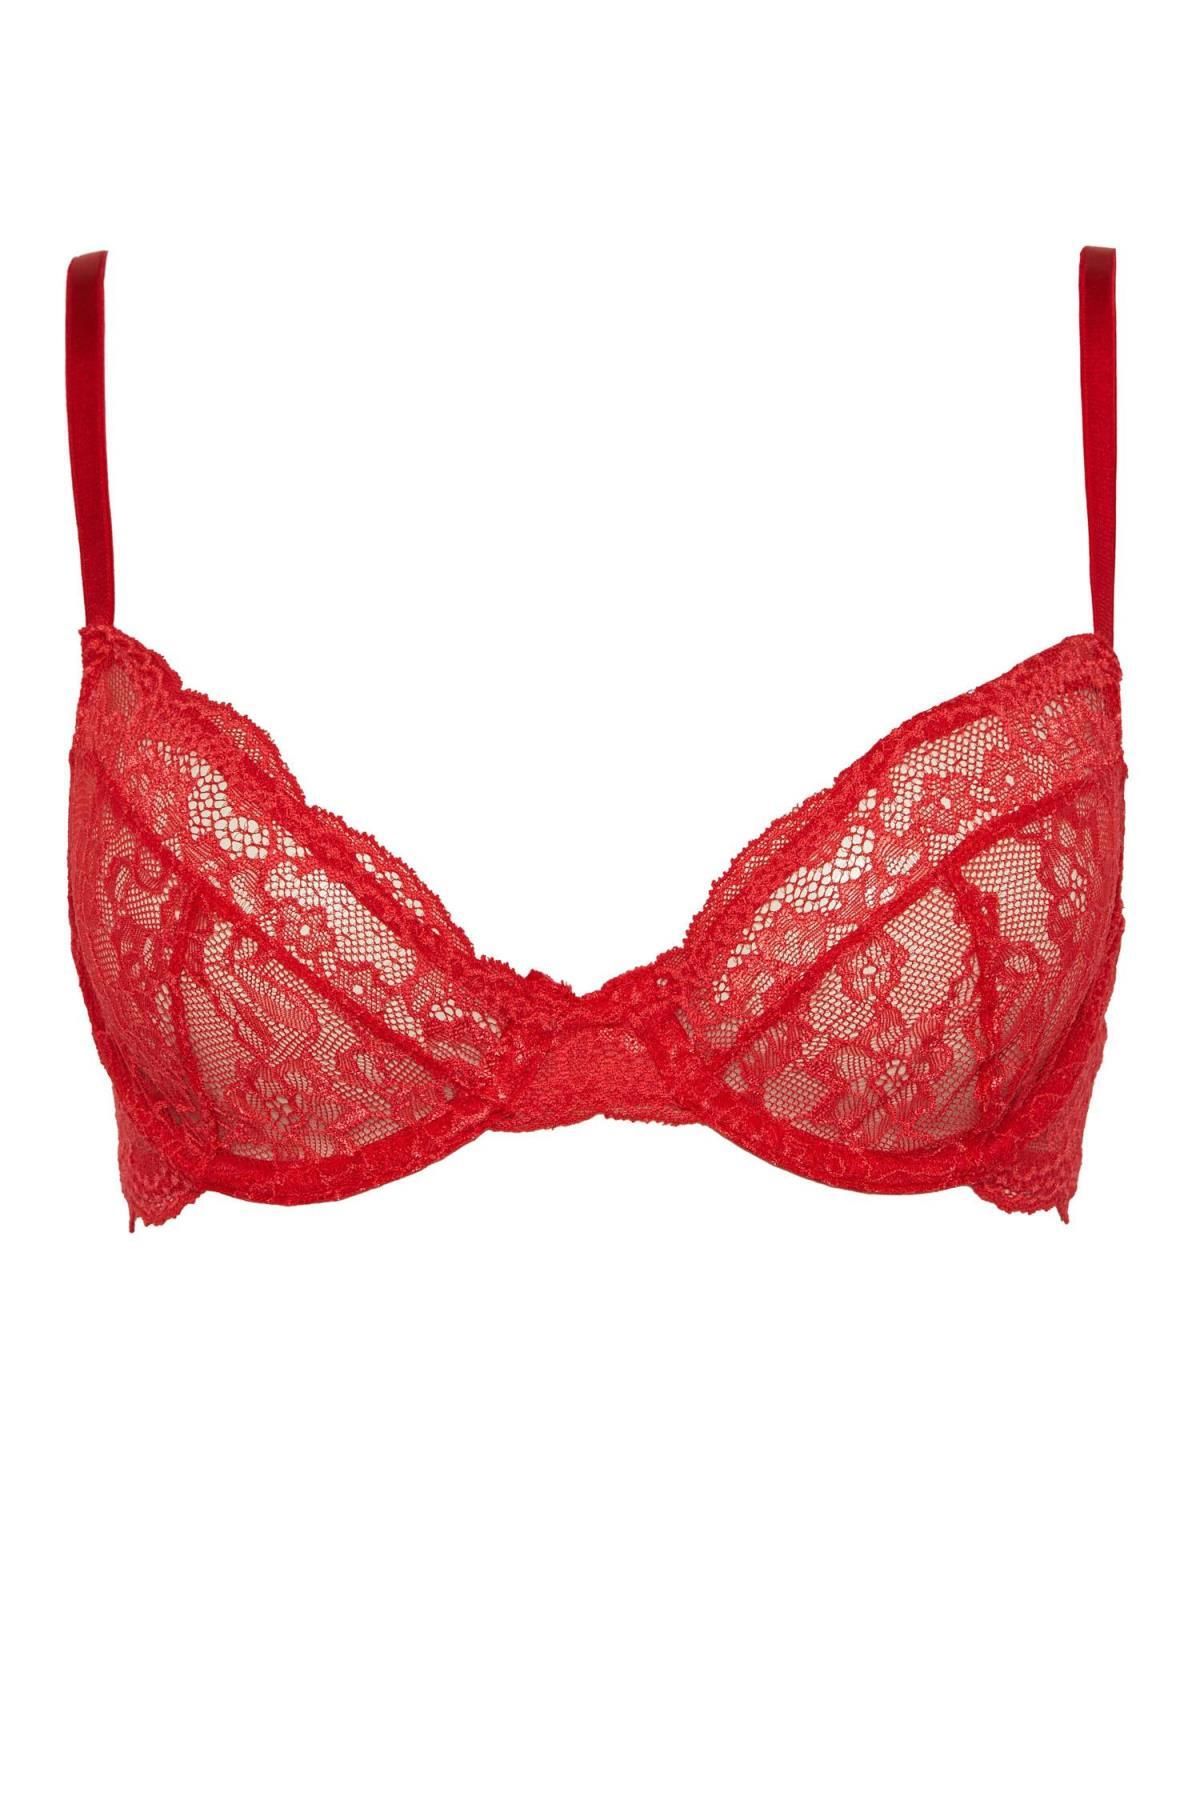 Defacto Fall In Love Lace Capless Non-Pad Red Bra - Trendyol